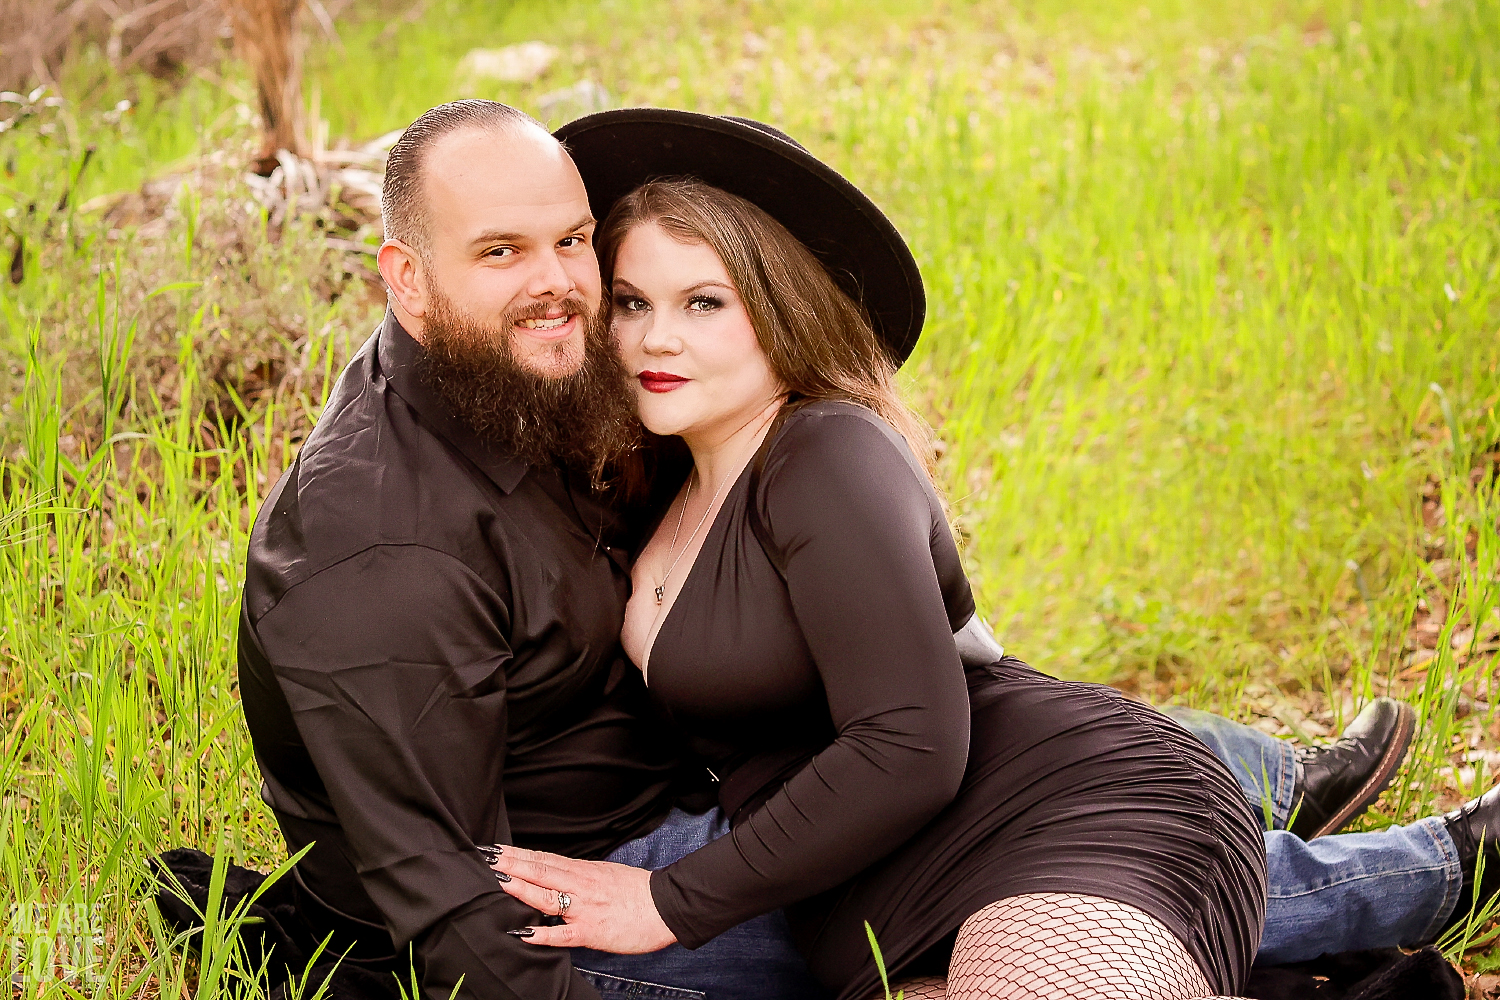 witchy_engagement_photoshoot_los_angeles_14